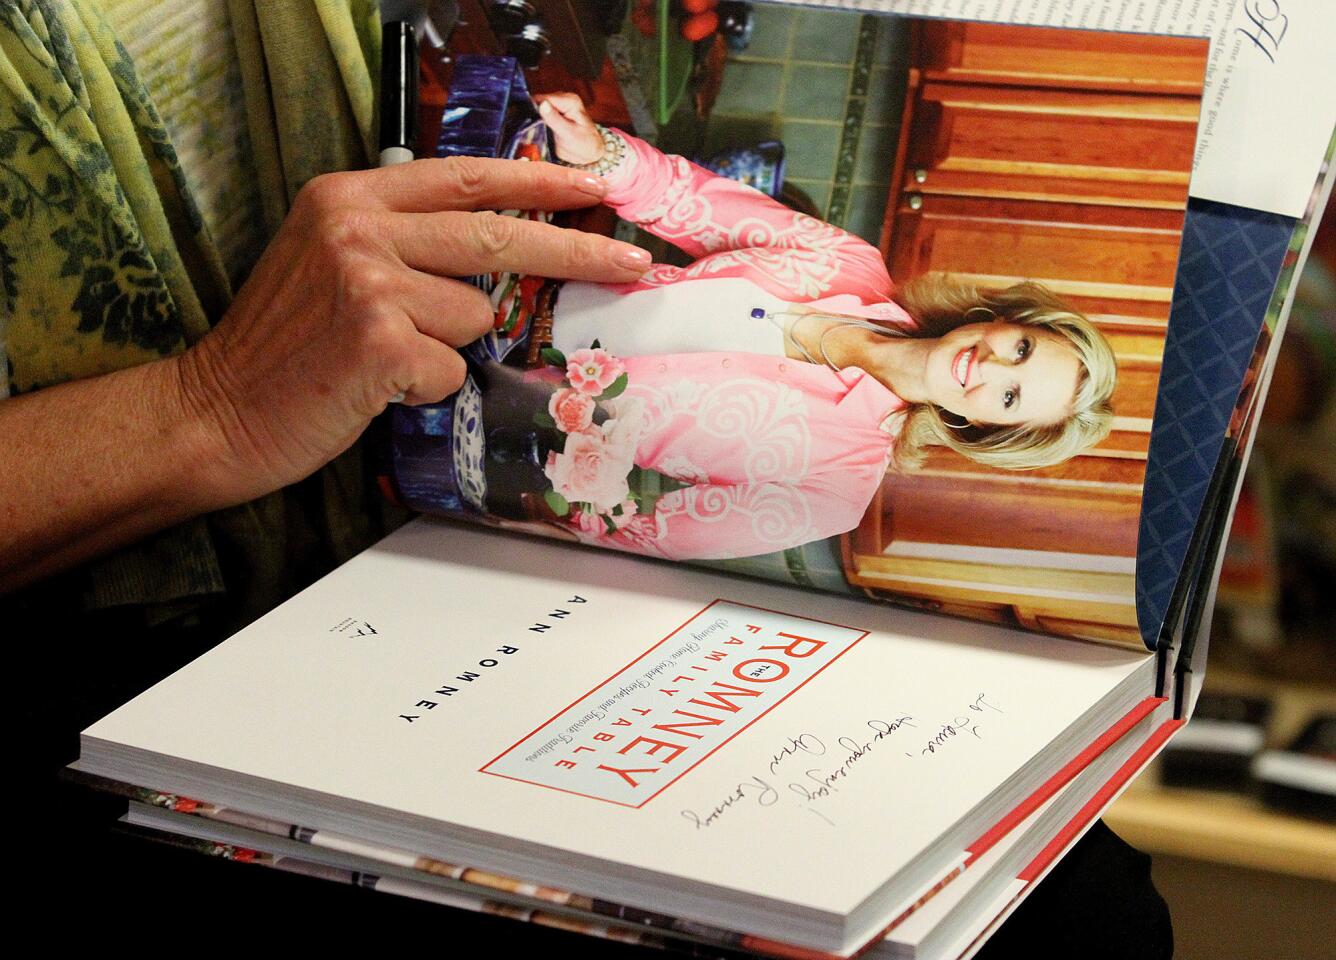 Photo Gallery: Ann Romney comes to Flintridge Bookstore to sign a cookbook she wrote